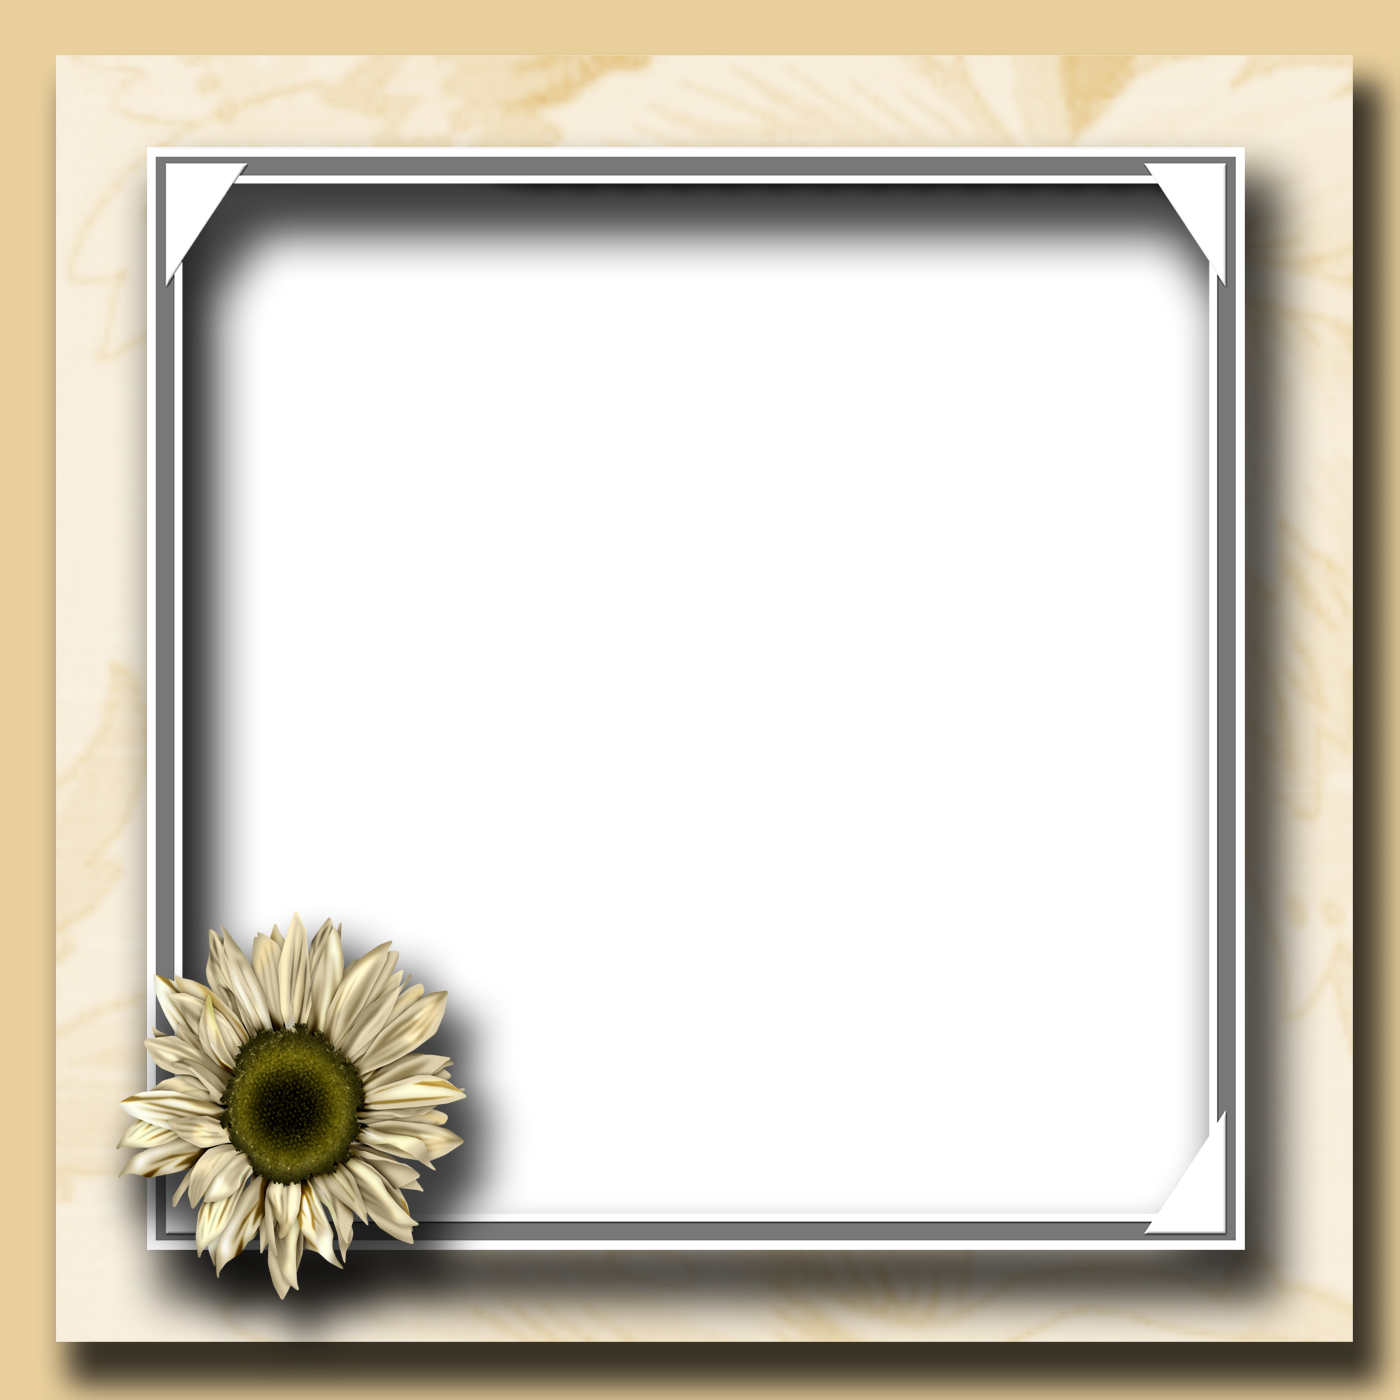 Free Abstract Floral Frame Png, Download Free Abstract Floral Frame Png